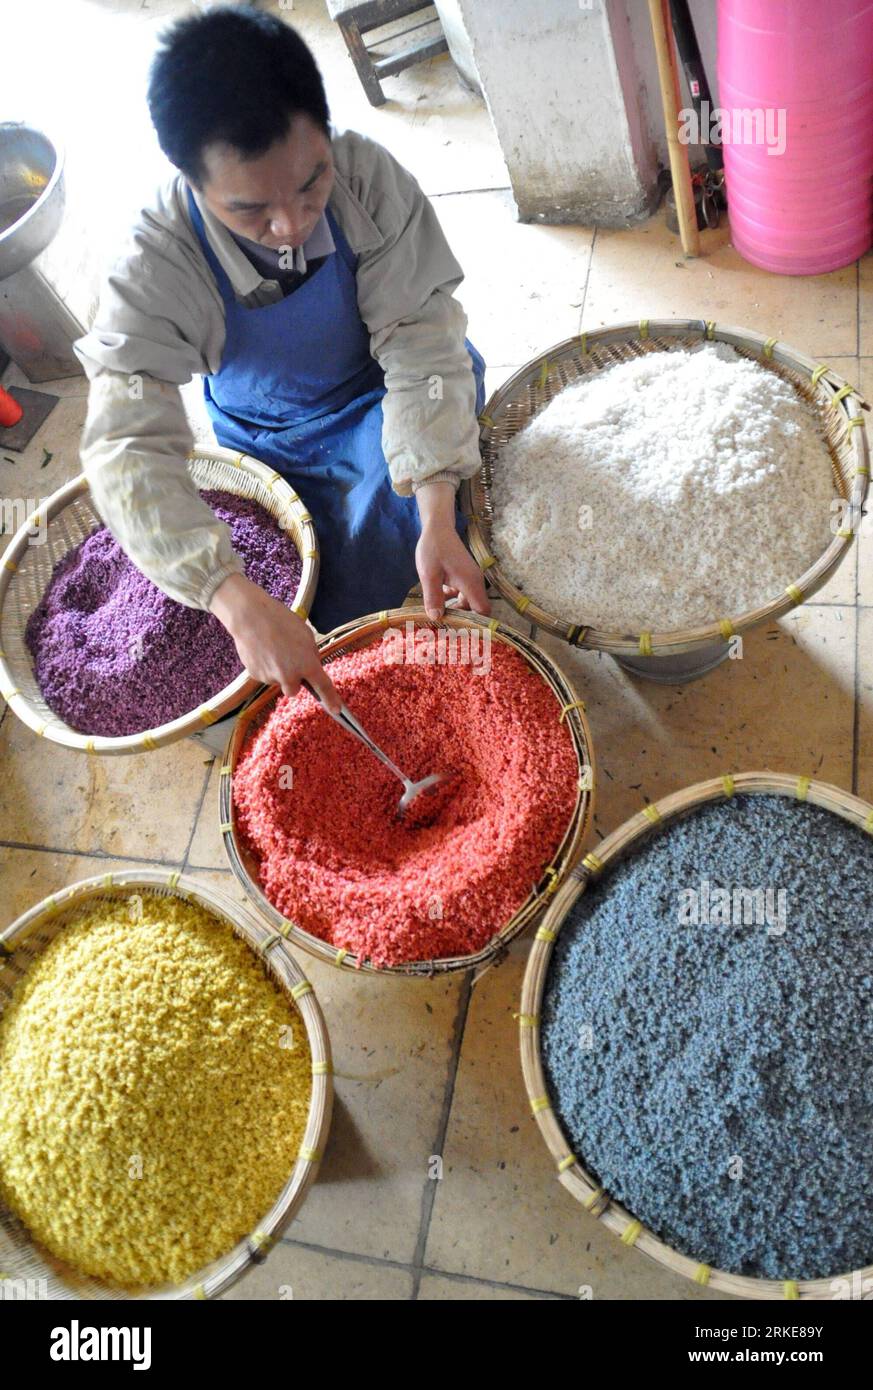 Bildnummer: 55114682  Datum: 28.03.2011  Copyright: imago/Xinhua (110328) -- NANNING, March 28, 2011 (Xinhua) -- A retailer makes five-color glutinous rice in Nanning, capital of southwest China s Guangxi Zhuang Autonomous Region, March 27, 2011. of Zhuang ethnic group have a tradition of making five-color glutinous rice during the Qingming Festival, also known as Tomb Sweeping Festival that falls on April 5 this year. Colored by steeped natural herbaceous plants such as day lily and maple leaf, the five-color rice, represents a good harvest of the year. (Xinhua/Lu Bo an) (wyo) #CHINA-GUANGXI- Stock Photo